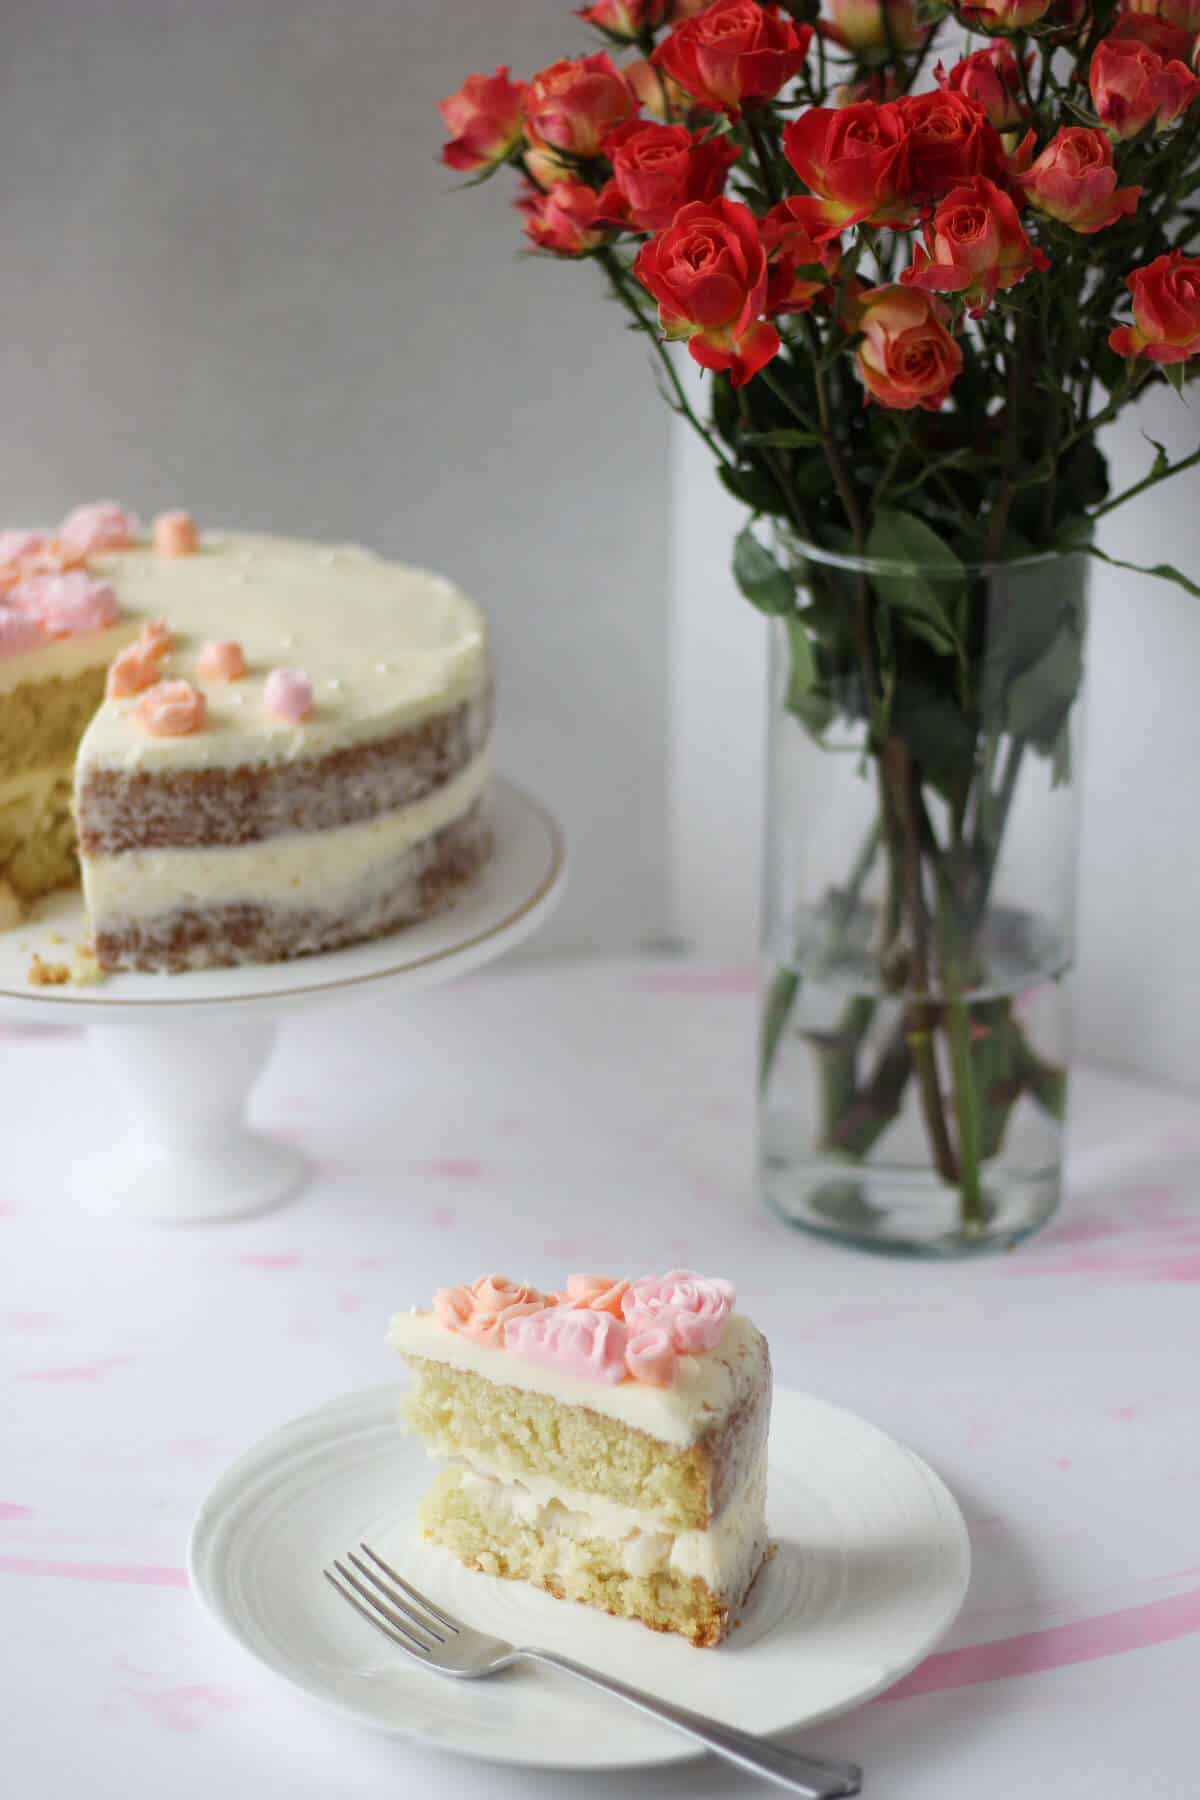 Slice of cake in the forefront with the rest of the cake and a vase of pink roses in the background.